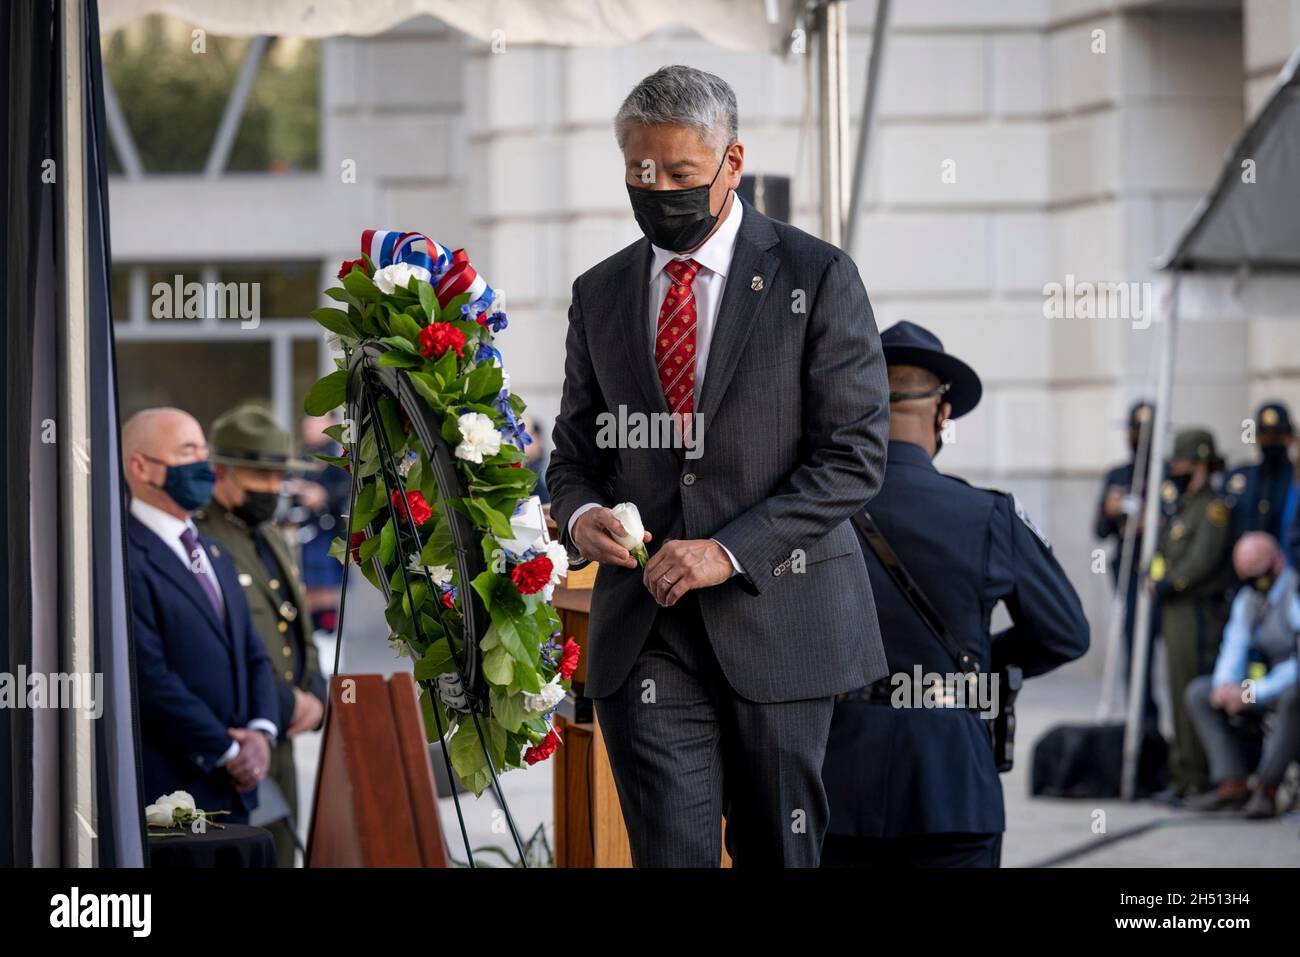 Washington, United States of America. 15 October, 2021. U.S Homeland Security Deputy Secretary John Tien during a ceremony honoring Custom and Border Patrol agents killed in the line of duty at the Valor Memorial and Wreath Laying Ceremony October 15, 2021 in Washington, D.C.Credit: Benjamin Applebaum/Homeland Security/Alamy Live News Stock Photo